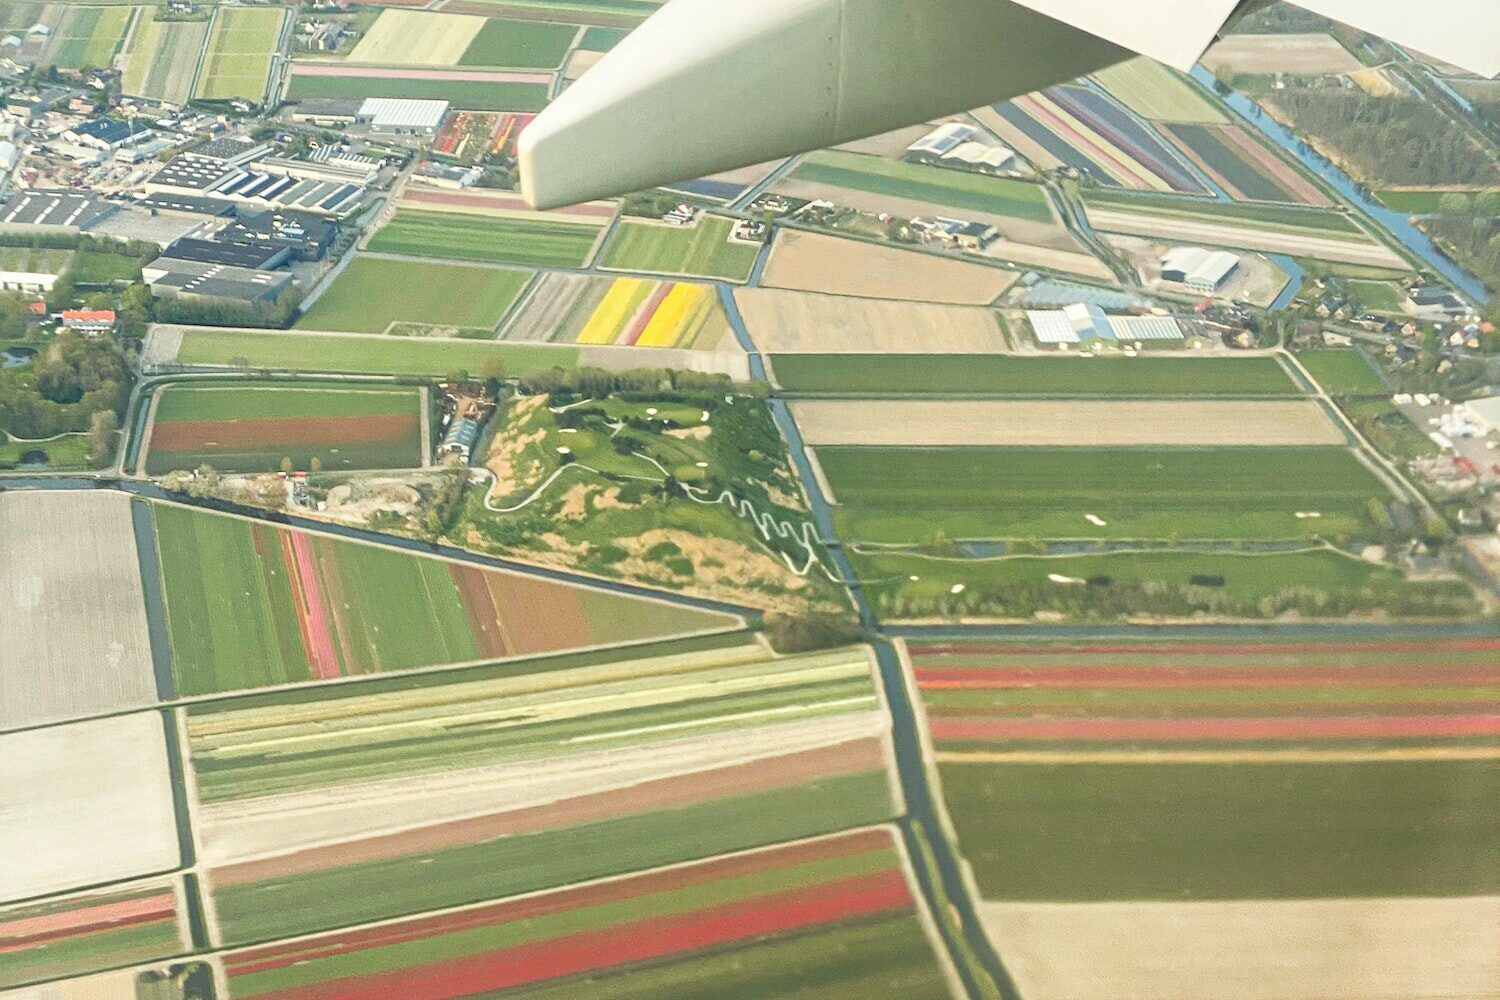 View at the blooming colorful tulip fields near Amsterdam from a plane window